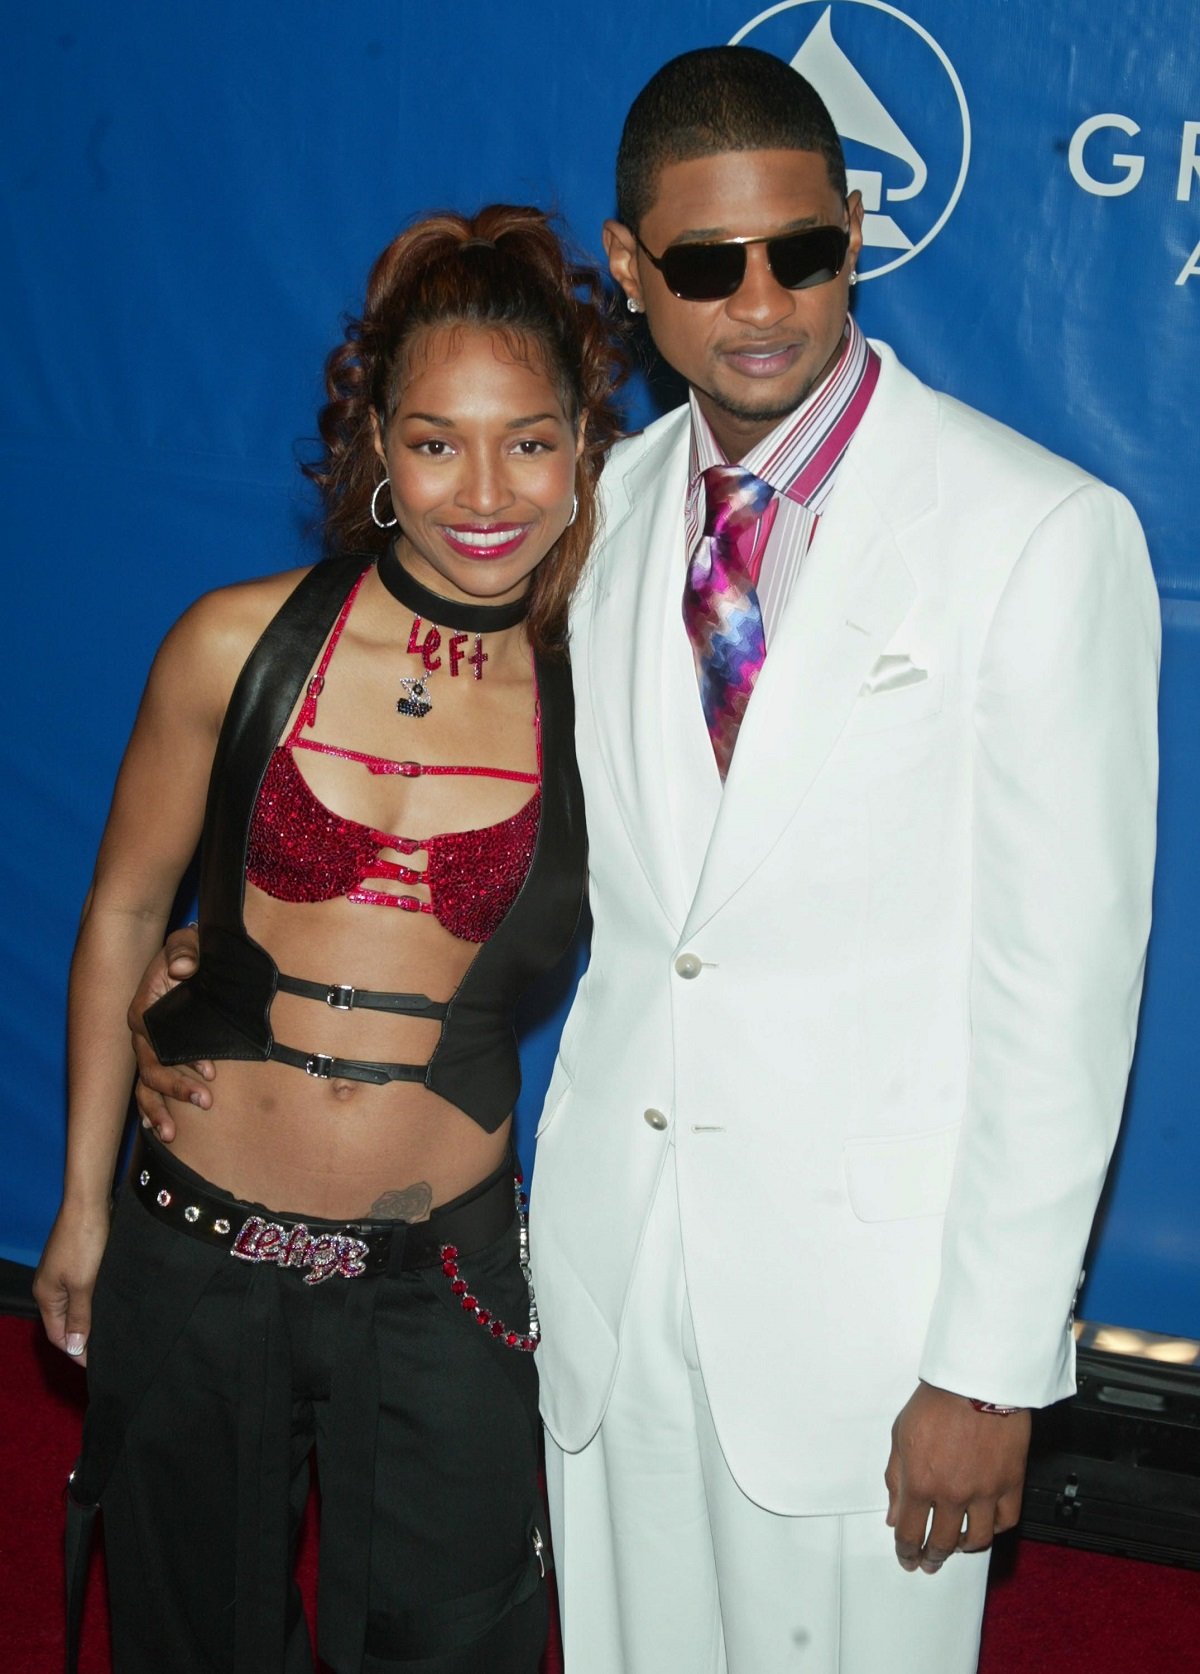 Chilli and Usher pose on the carpet together at the 45th annual GRAMMY Awards